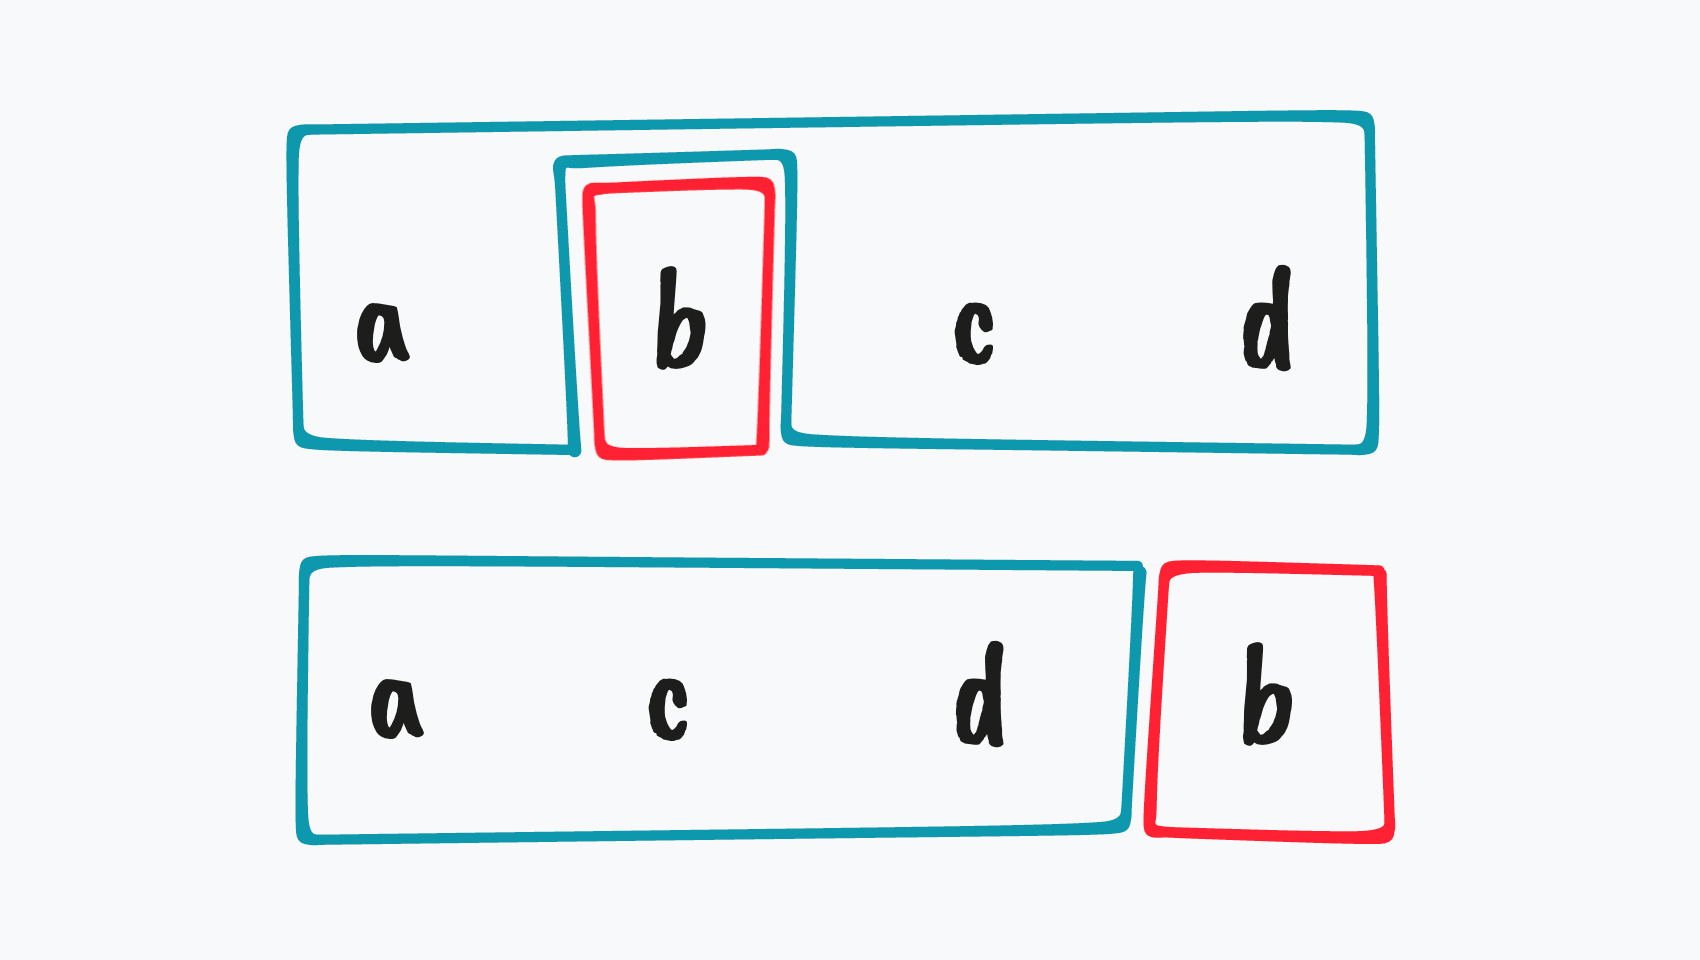 A diagram showing the result of moving c to front in items a, b, c, d.